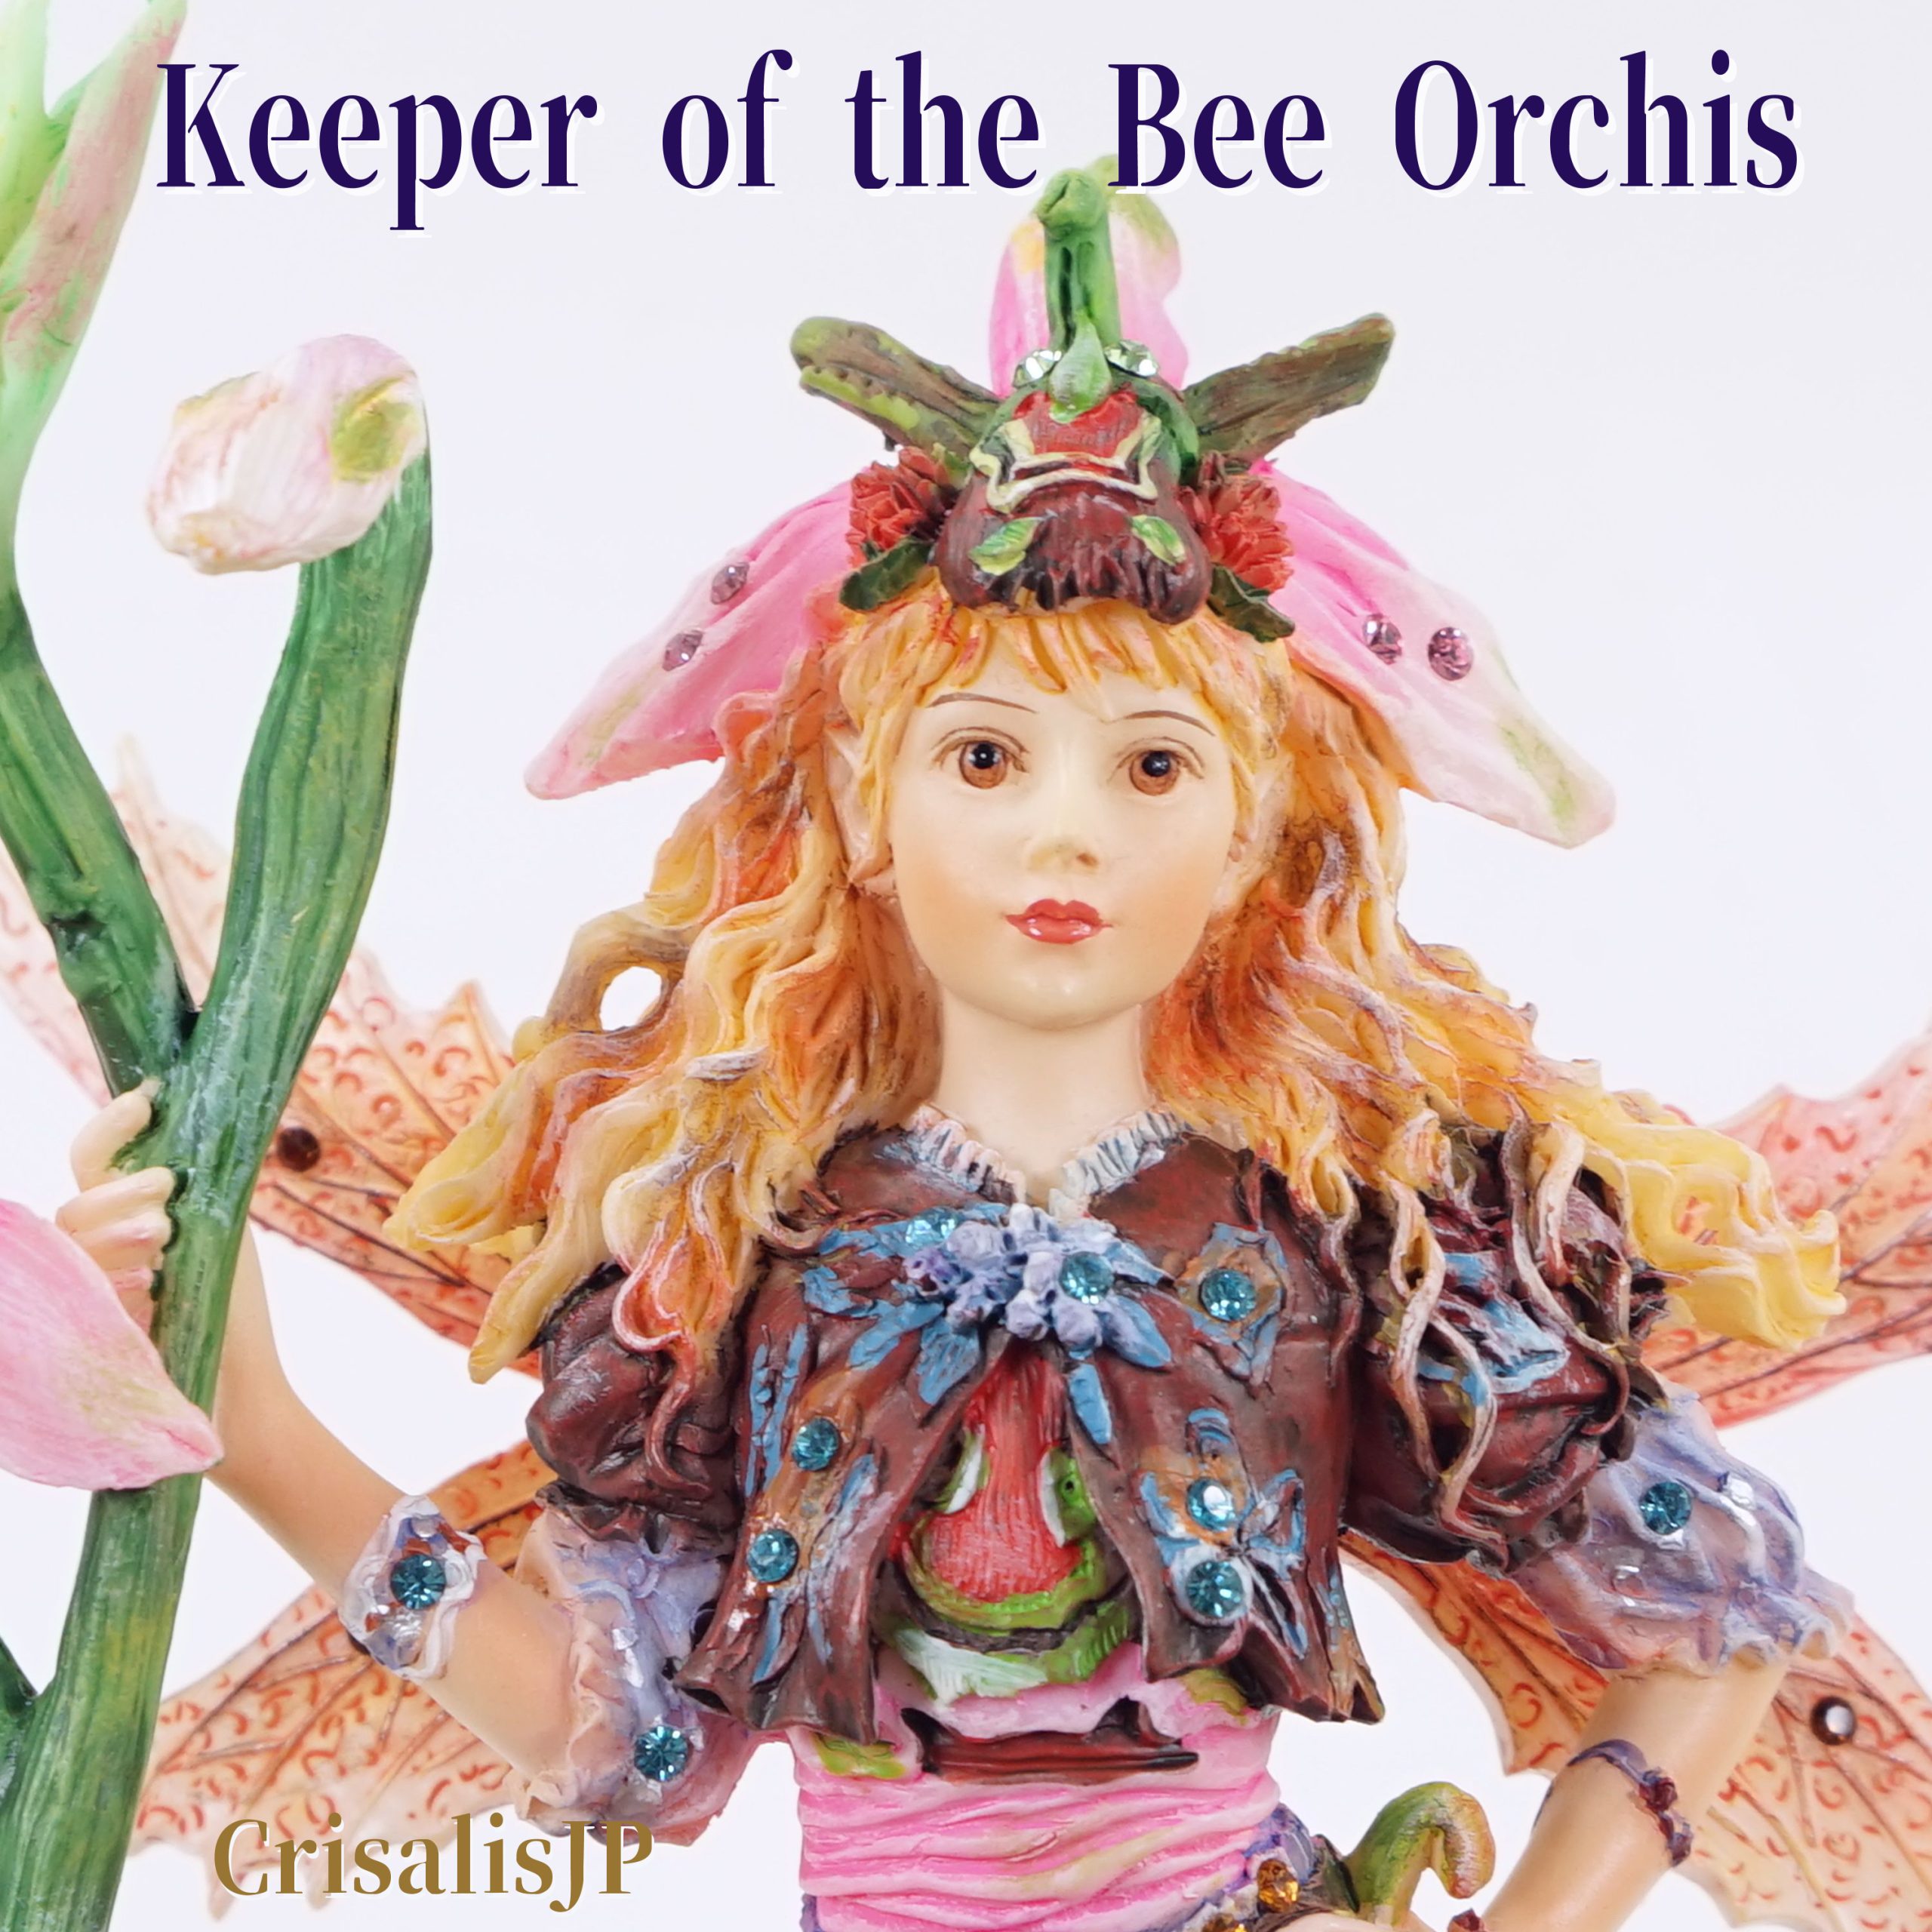 Keeper of the Bee Orchis